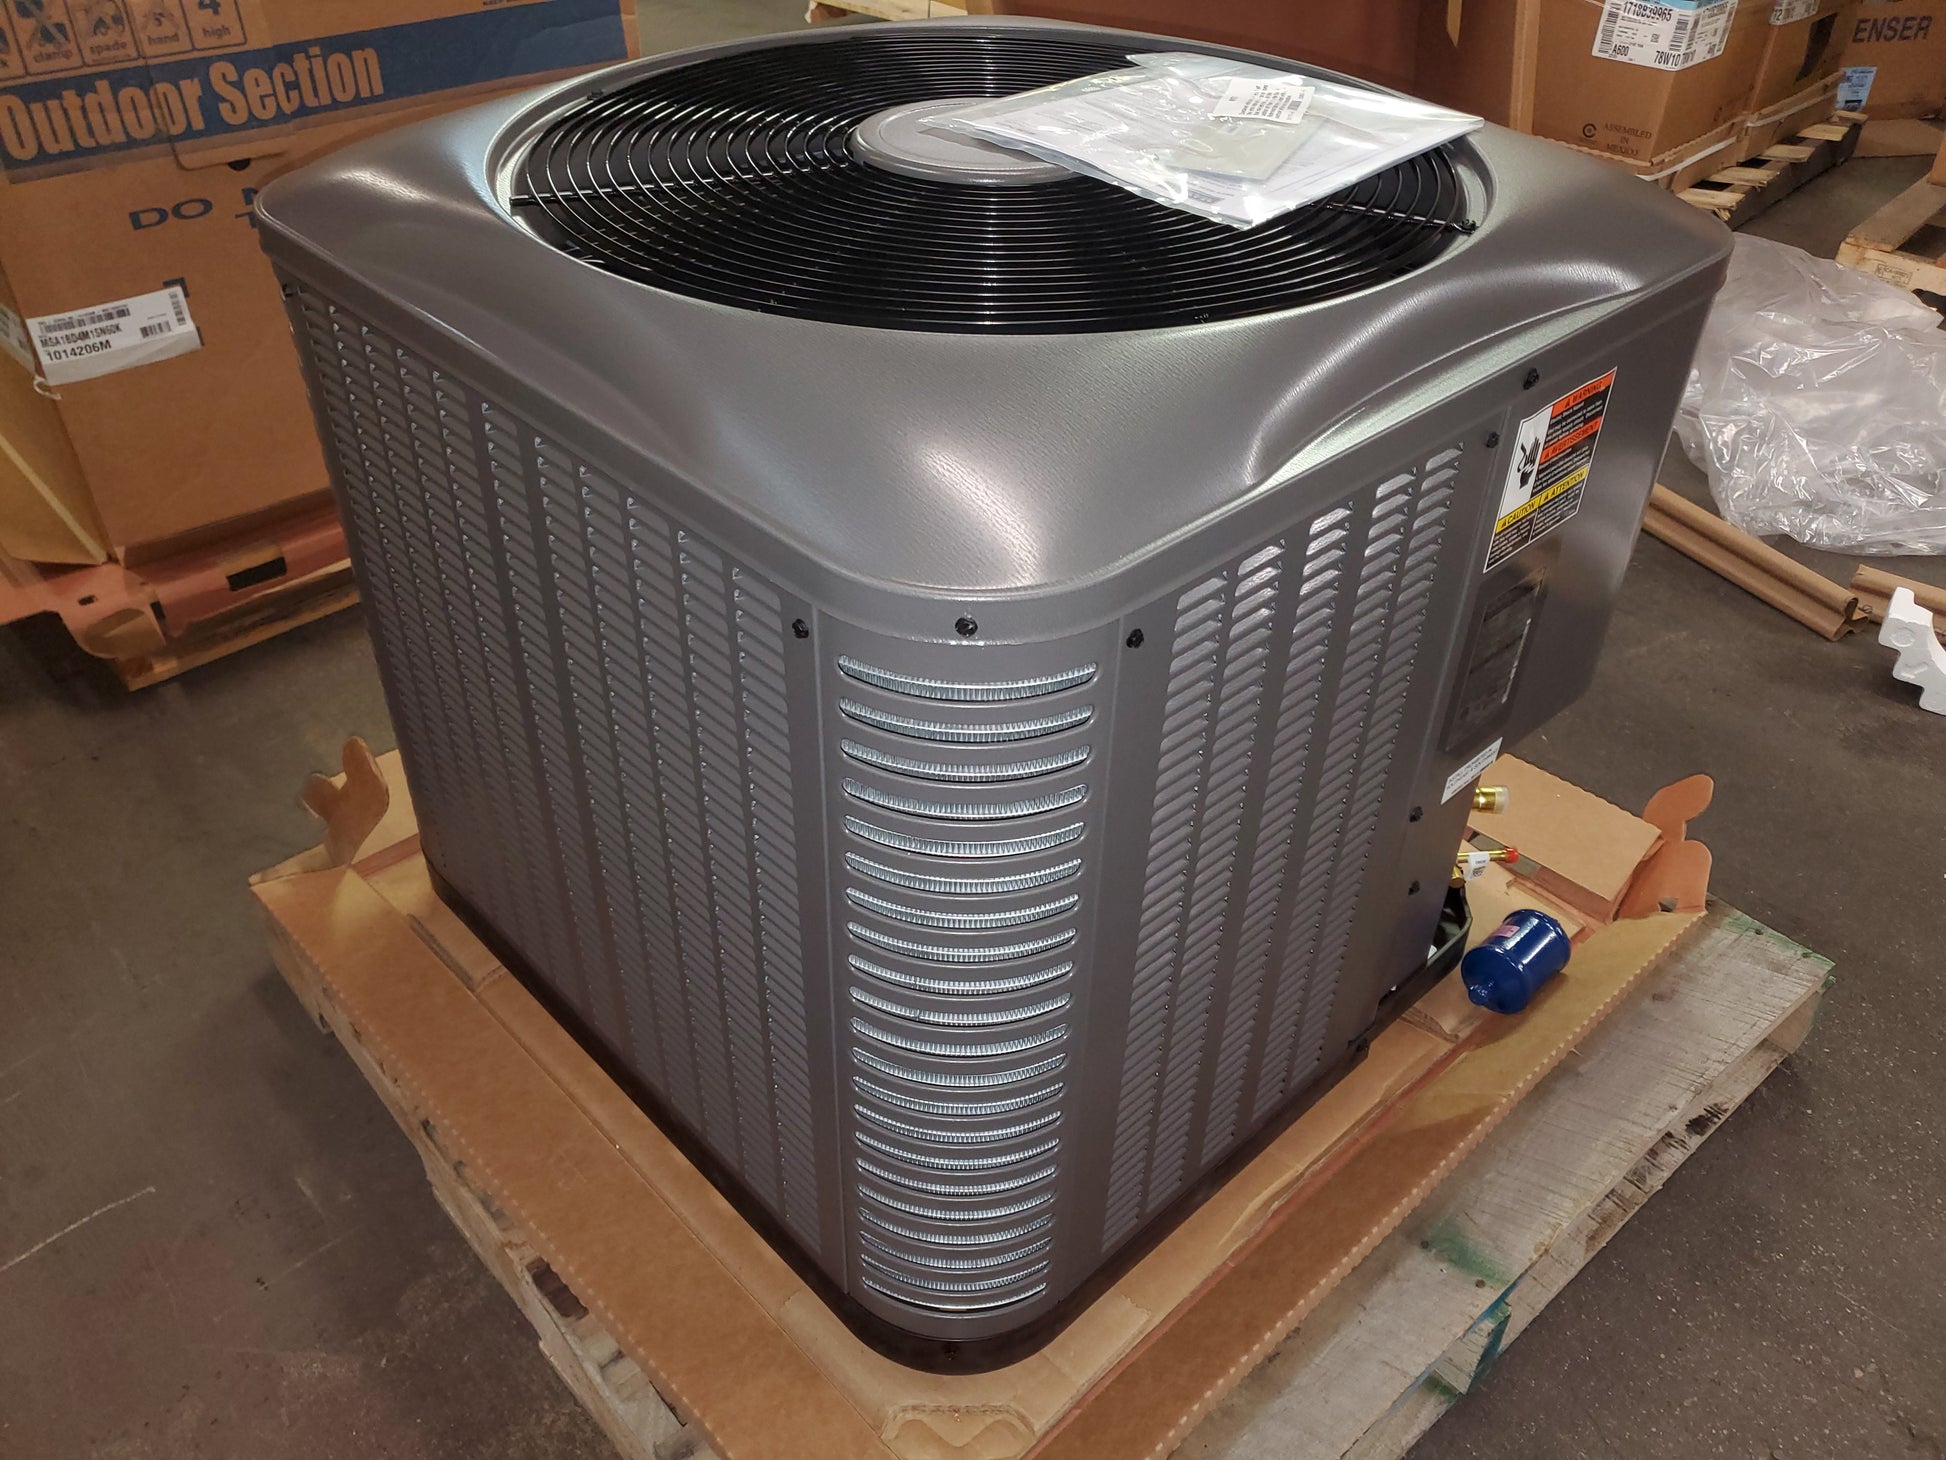 4 TON "M 120" SERIES SPLIT SYSTEM AIR CONDITIONER, 13 SEER 208-230/60/1 R-410A